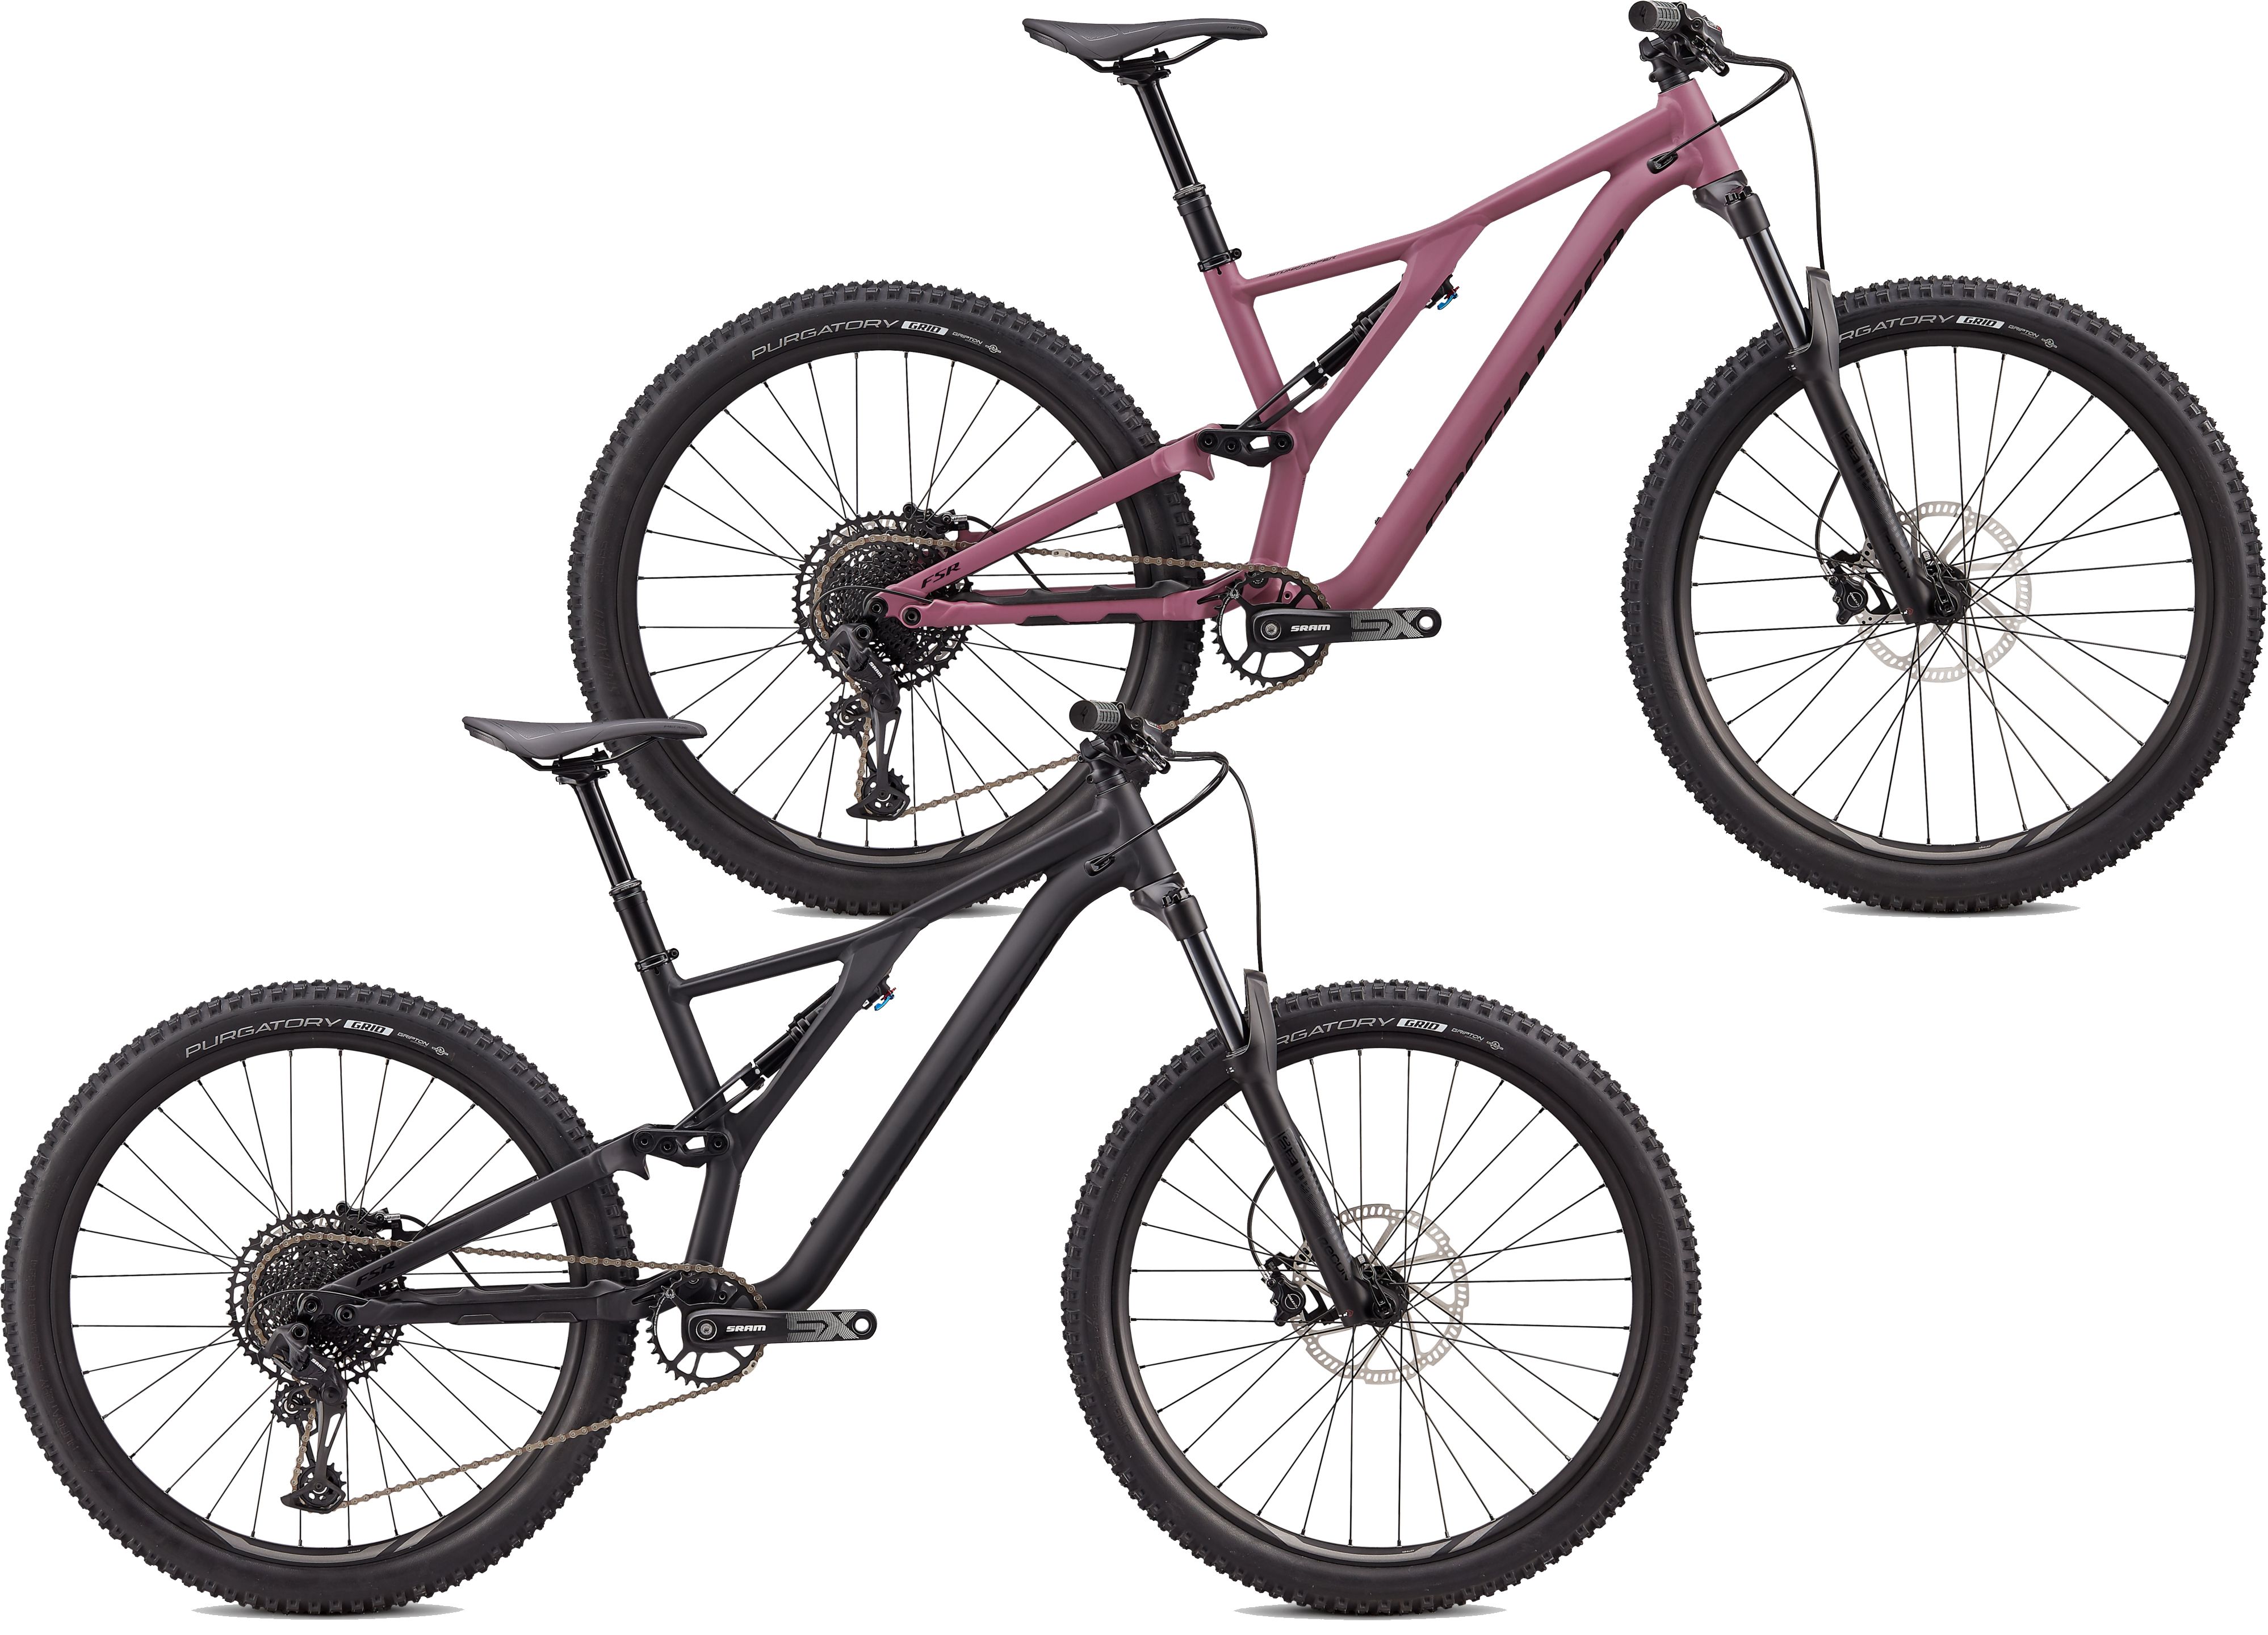 2020 specialized stumpjumper st alloy 27.5